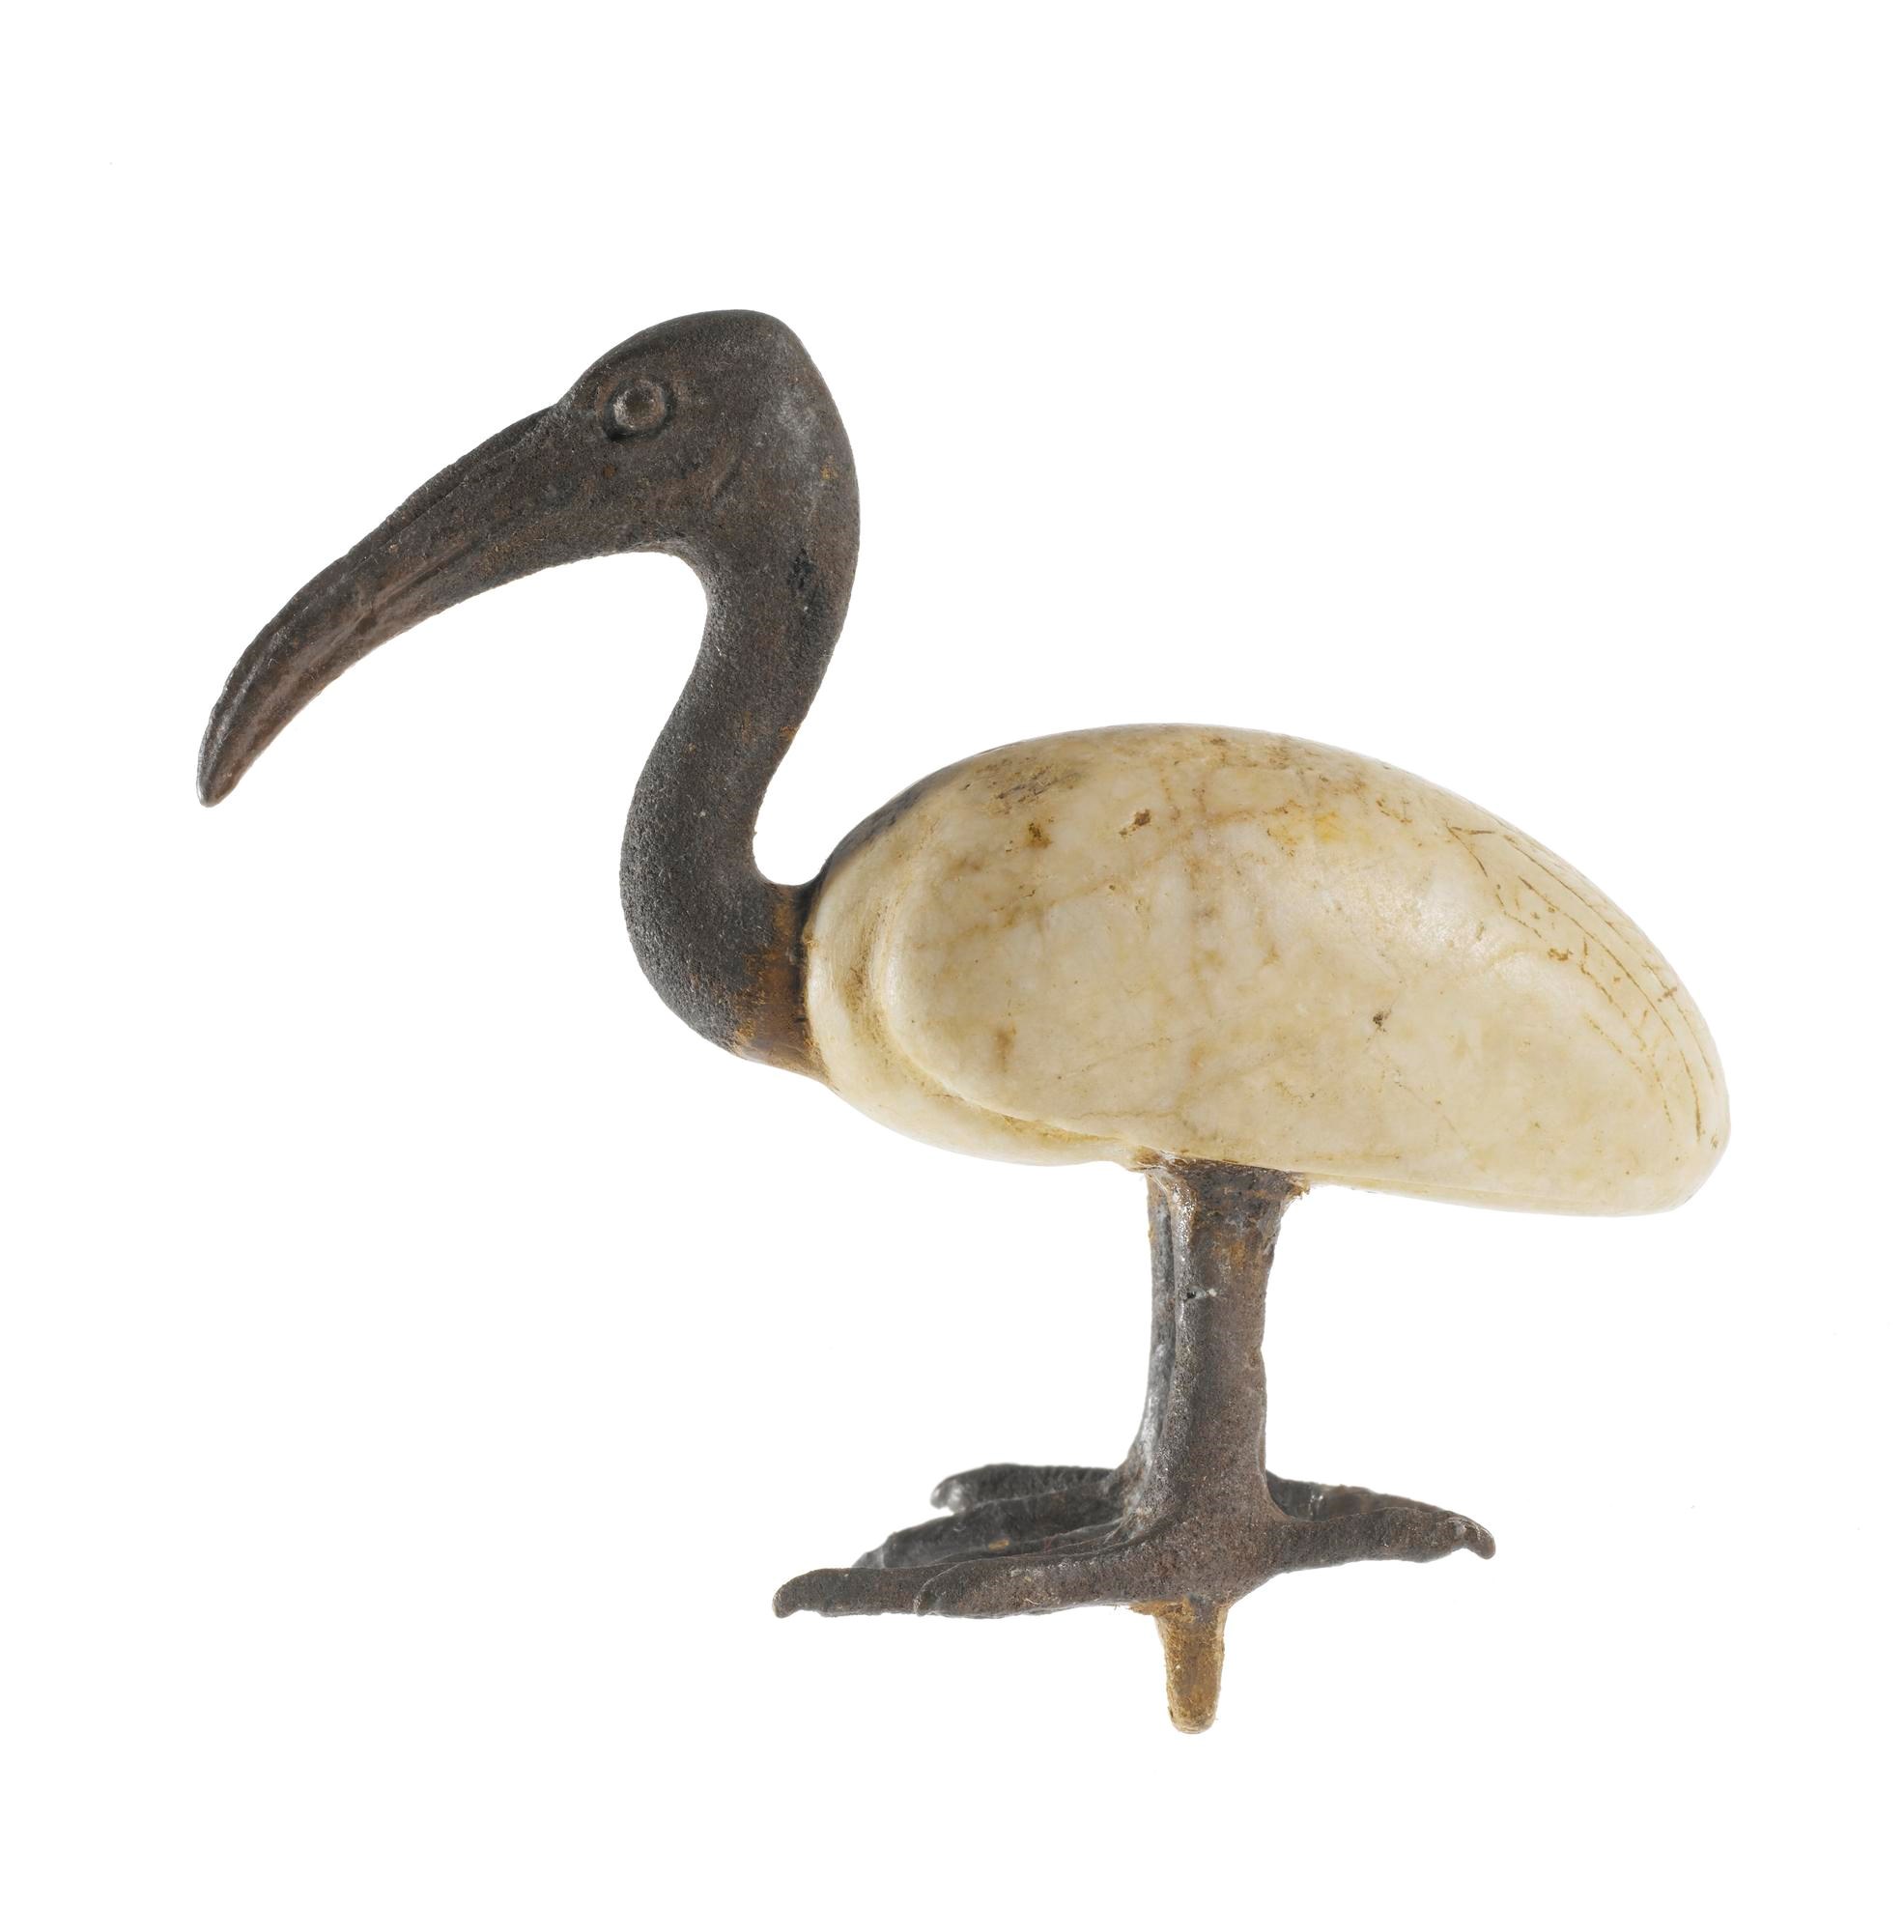 Votive statuette in the form of an ibis, the body made of calcite and the head and legs of bronze: Ancient Egyptian, Late Period.